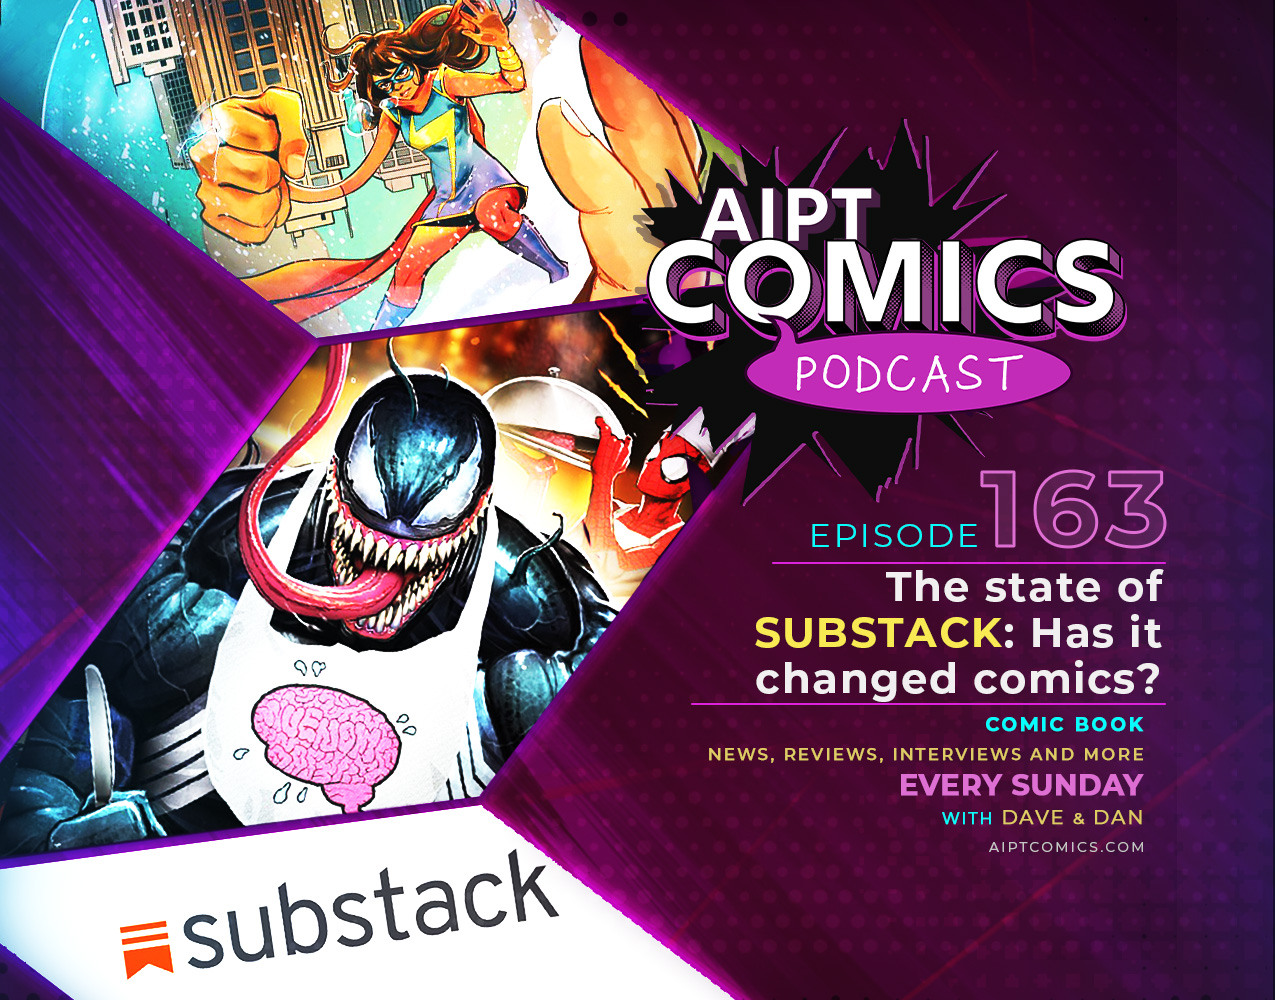 AIPT Comics podcast episode 163: The state of Substack: Has it changed comics?